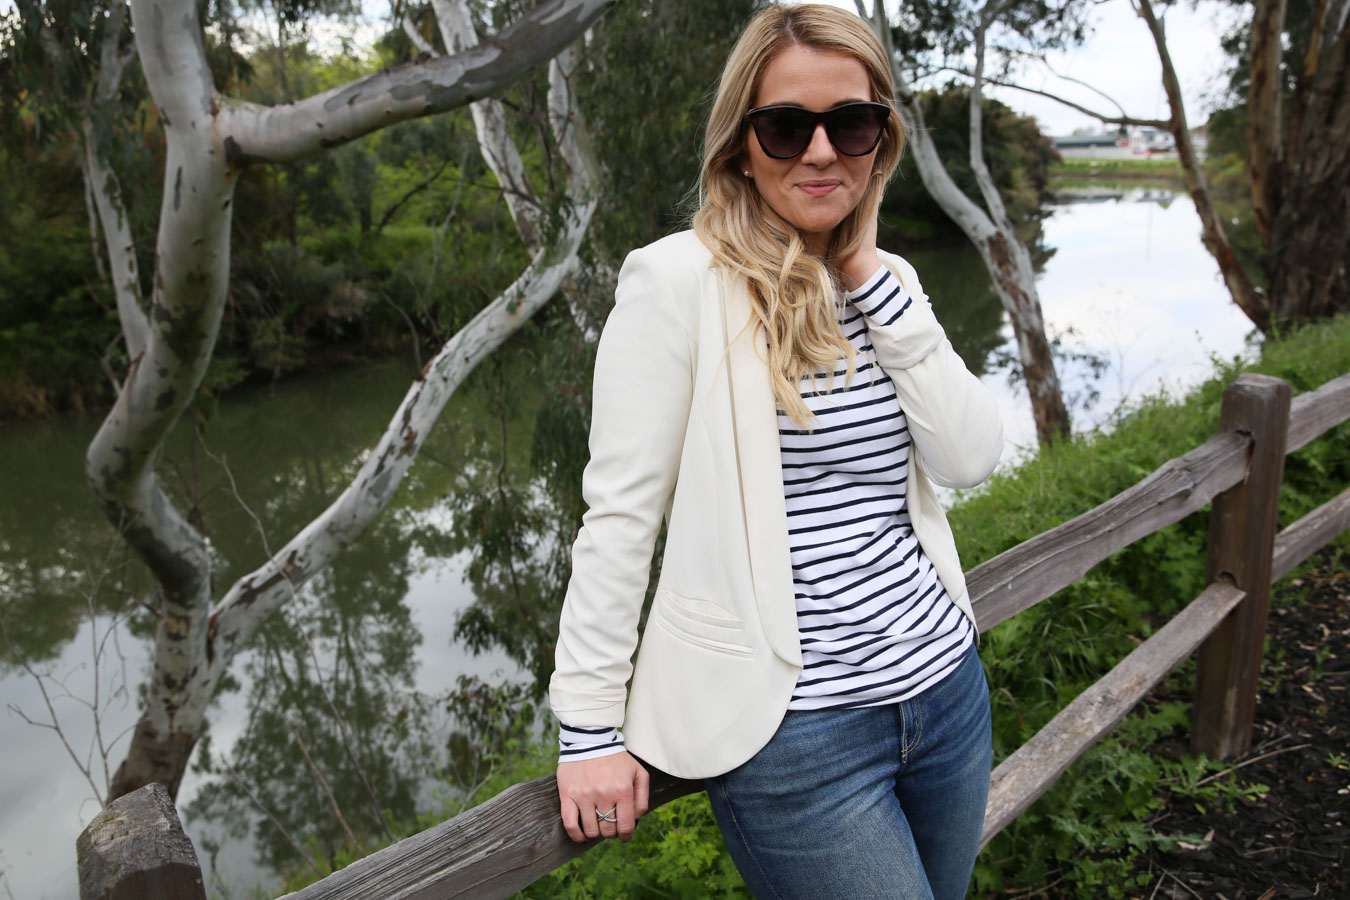 What to Wear in Wine Country - Striped Shirt + Jeans